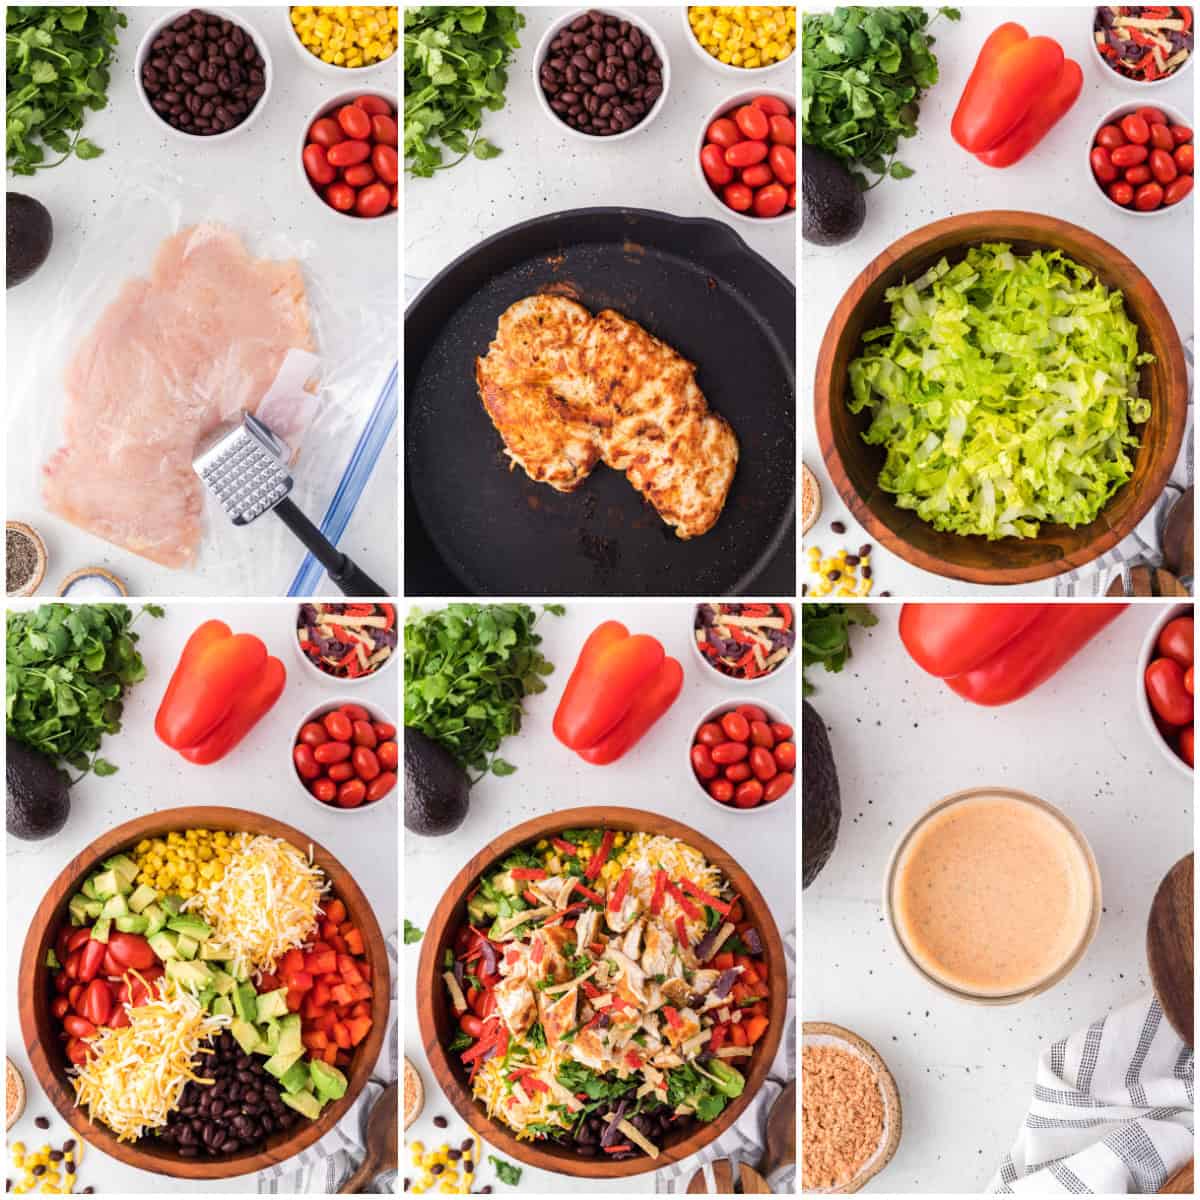 Step by step photos on how to make a Southwest Salad.